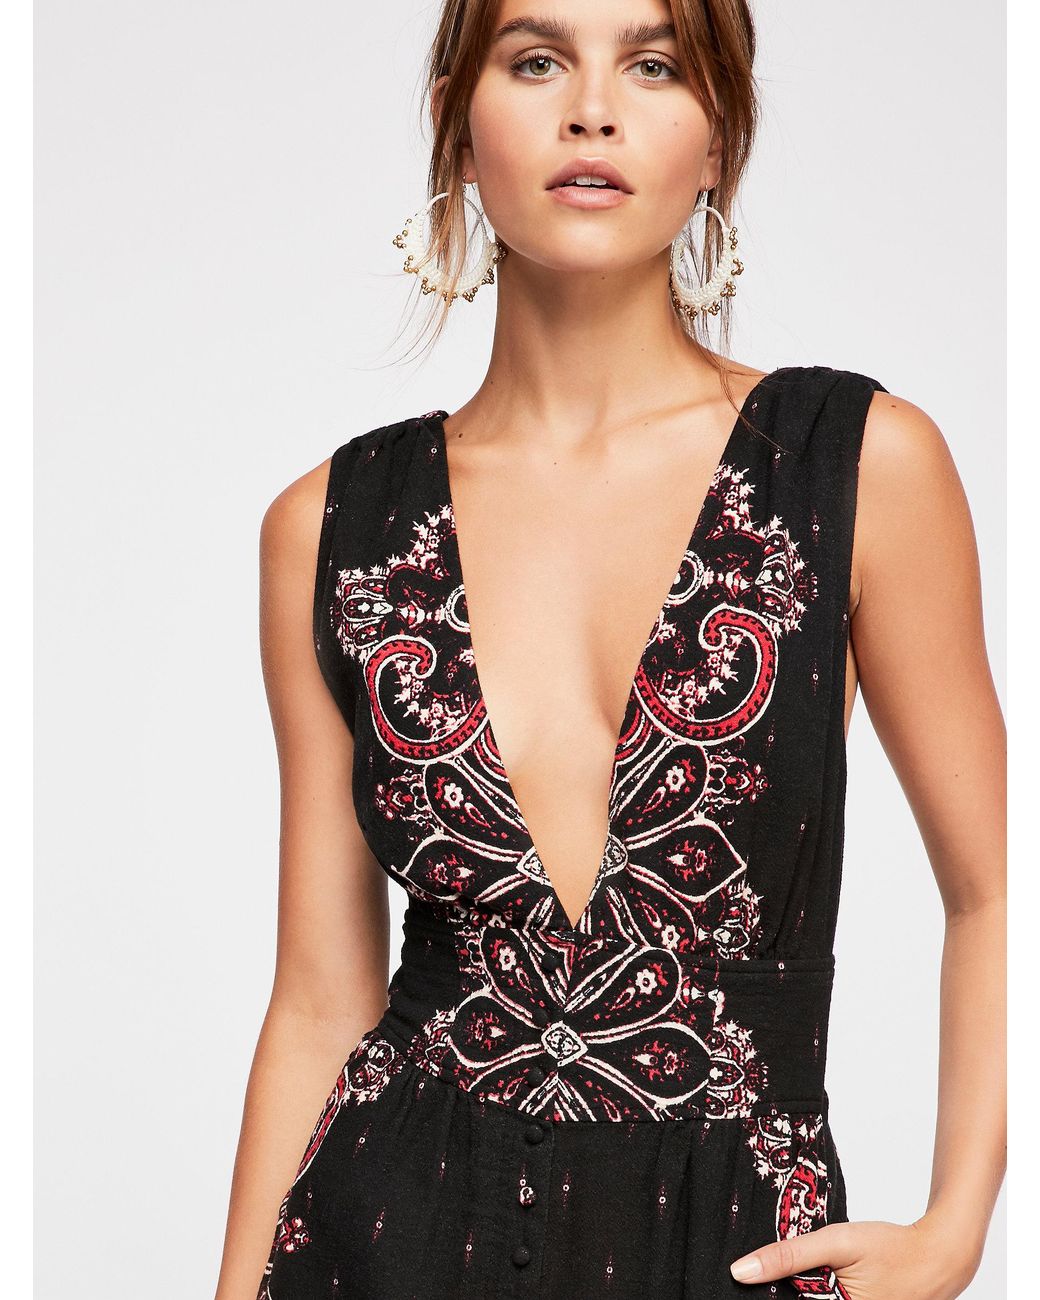 Free People Magical Jumpsuit Size M | eBay